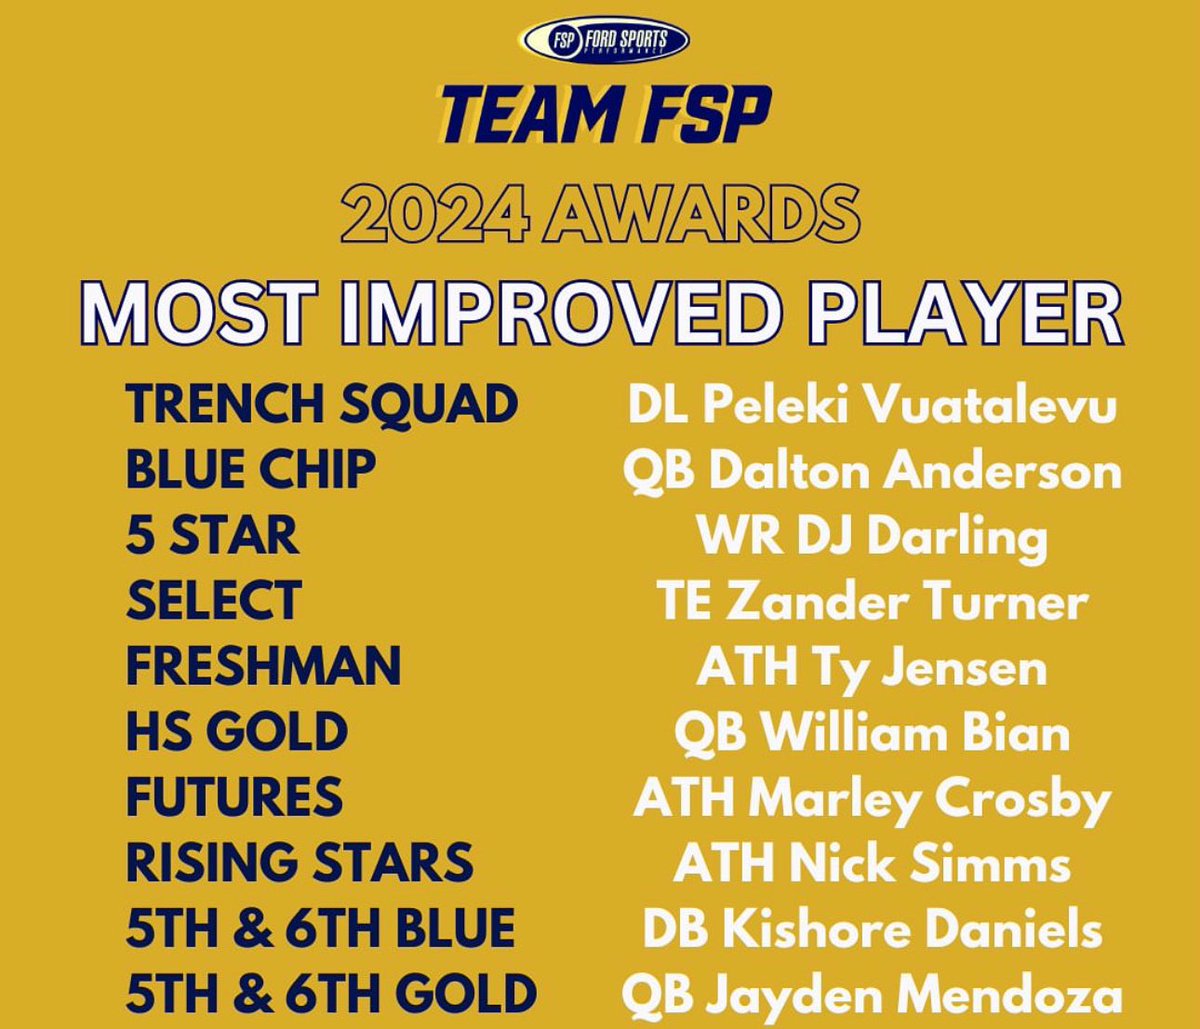 Grateful to be named the Most Improved Player on the @Pylon7on7 #1 Freshman Team in the nation! #teamfsp @DomSkene @TFordFSP @CoachHarr1s